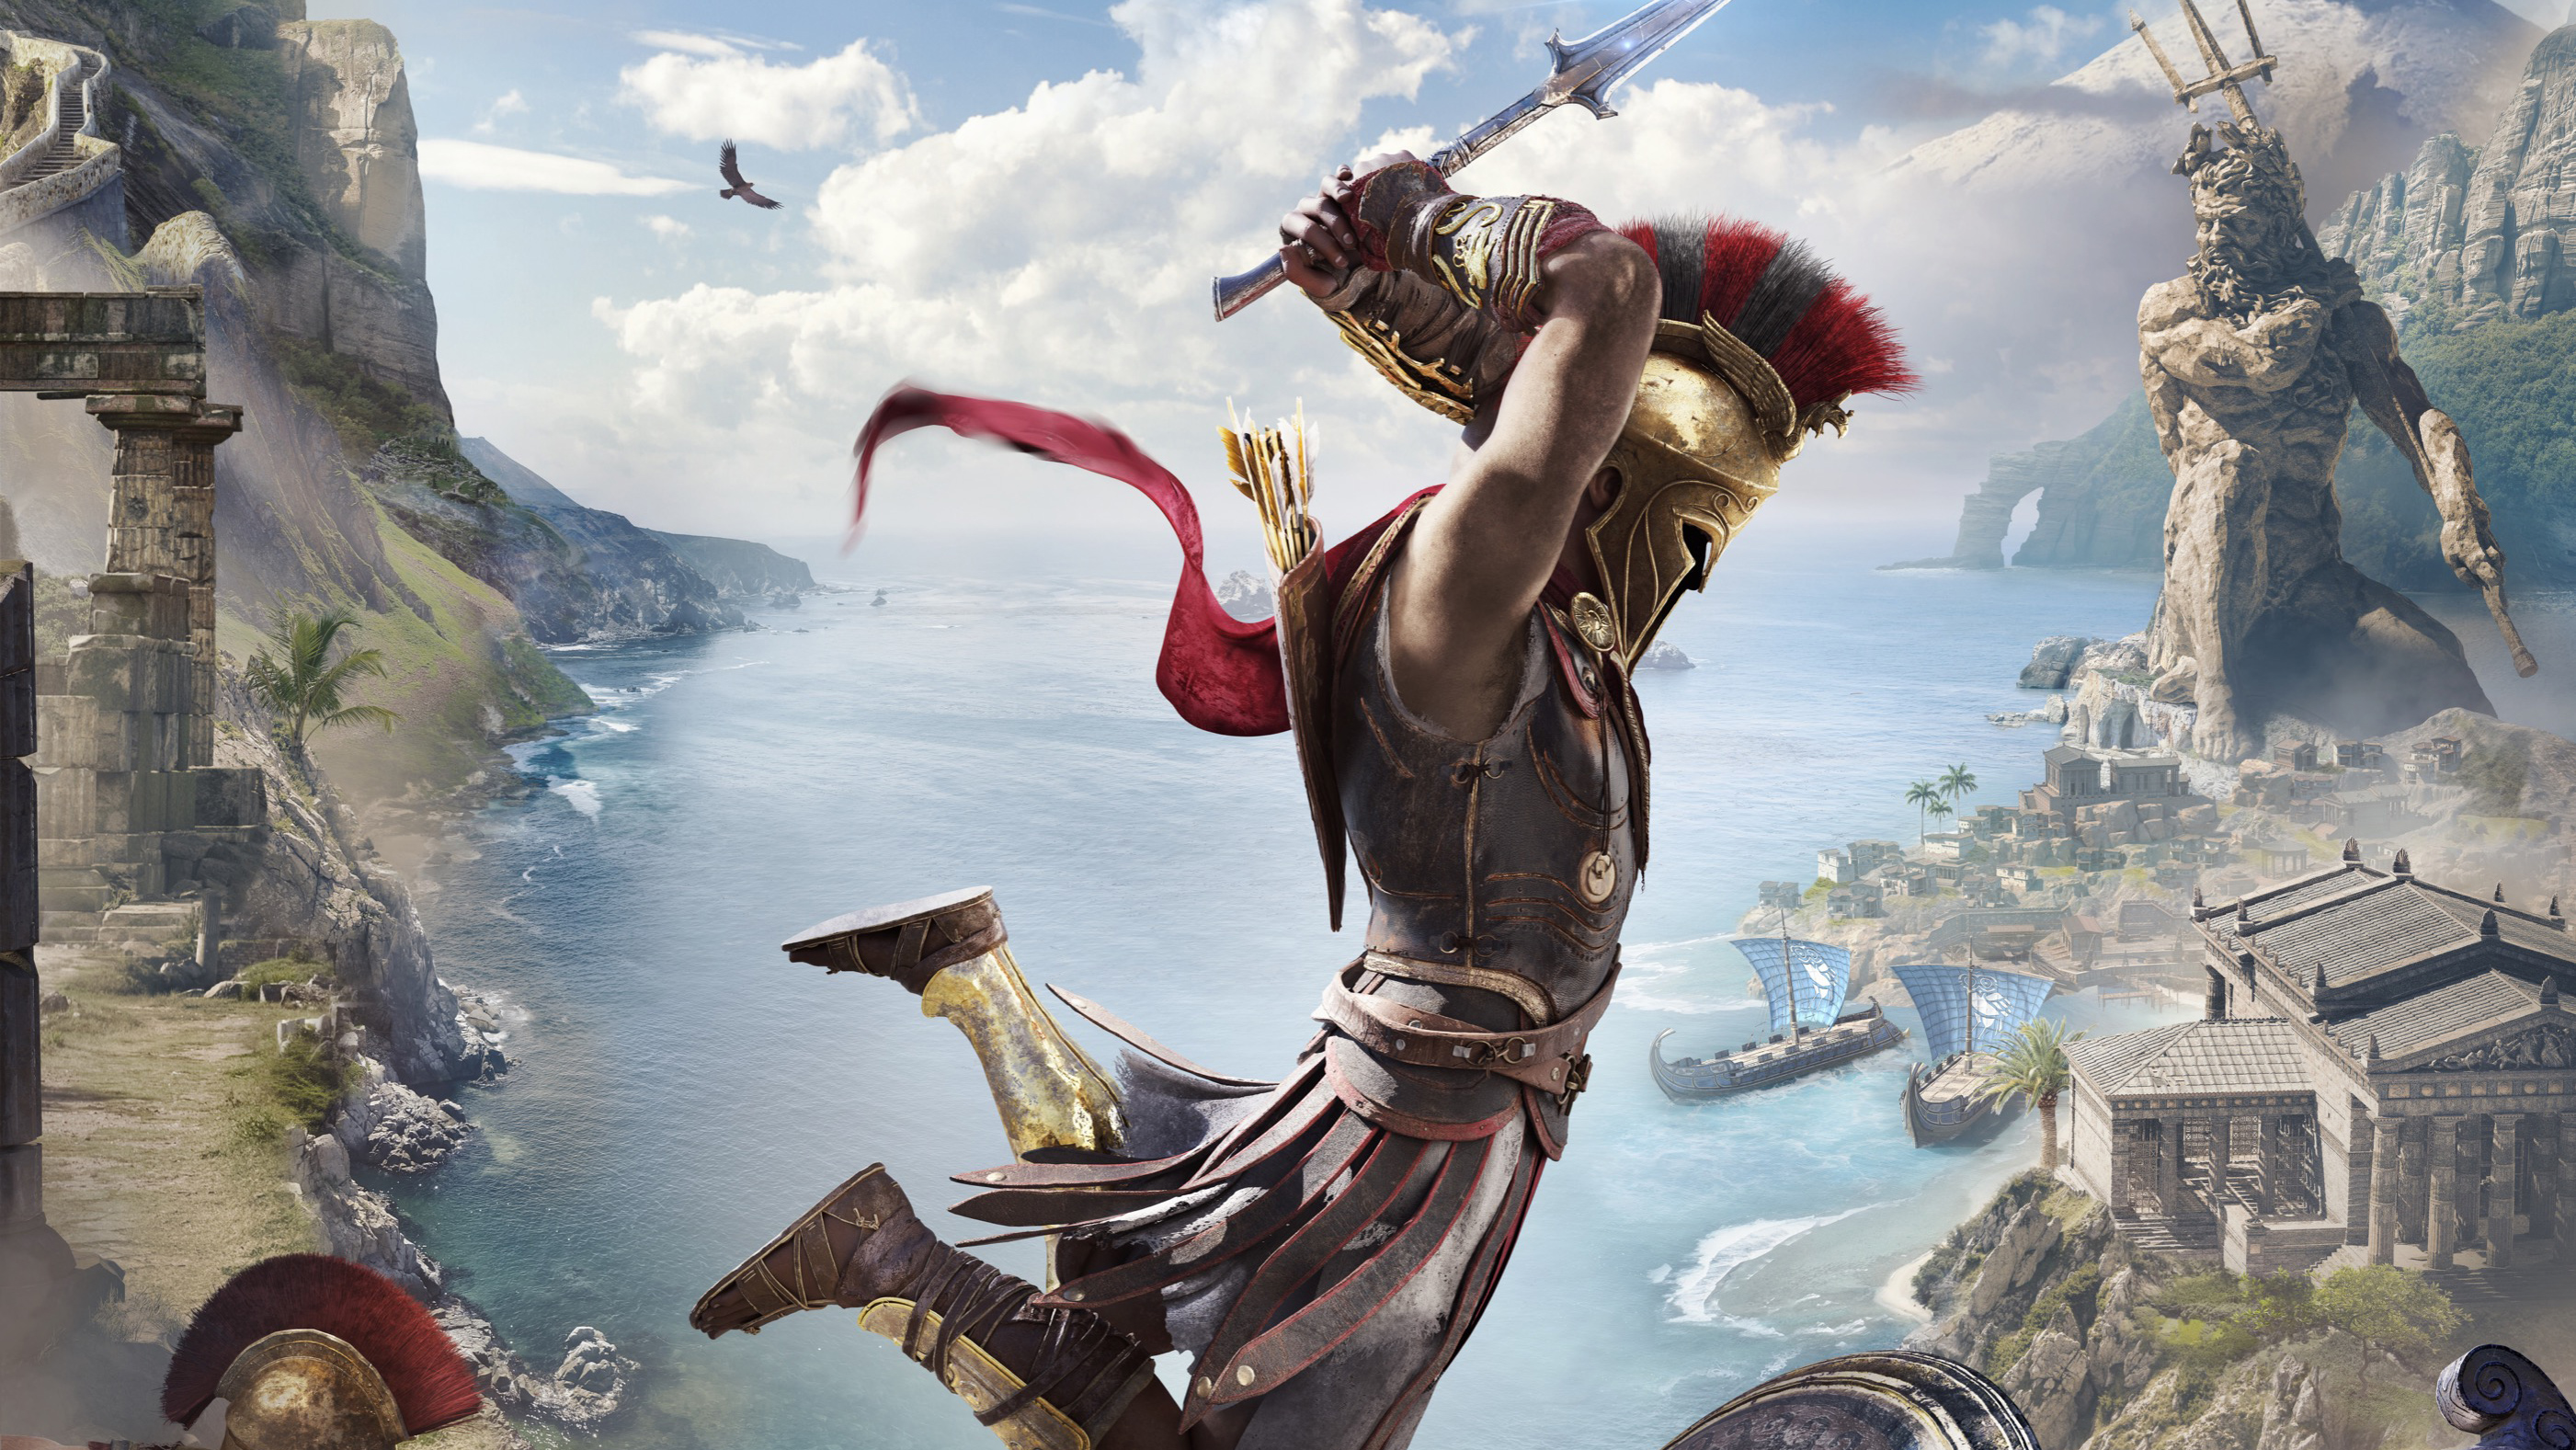 Assassins Creed Odyssey Ps4 Pro E3 2018 Hd Games 4k Wallpapers Images Backgrounds Photos